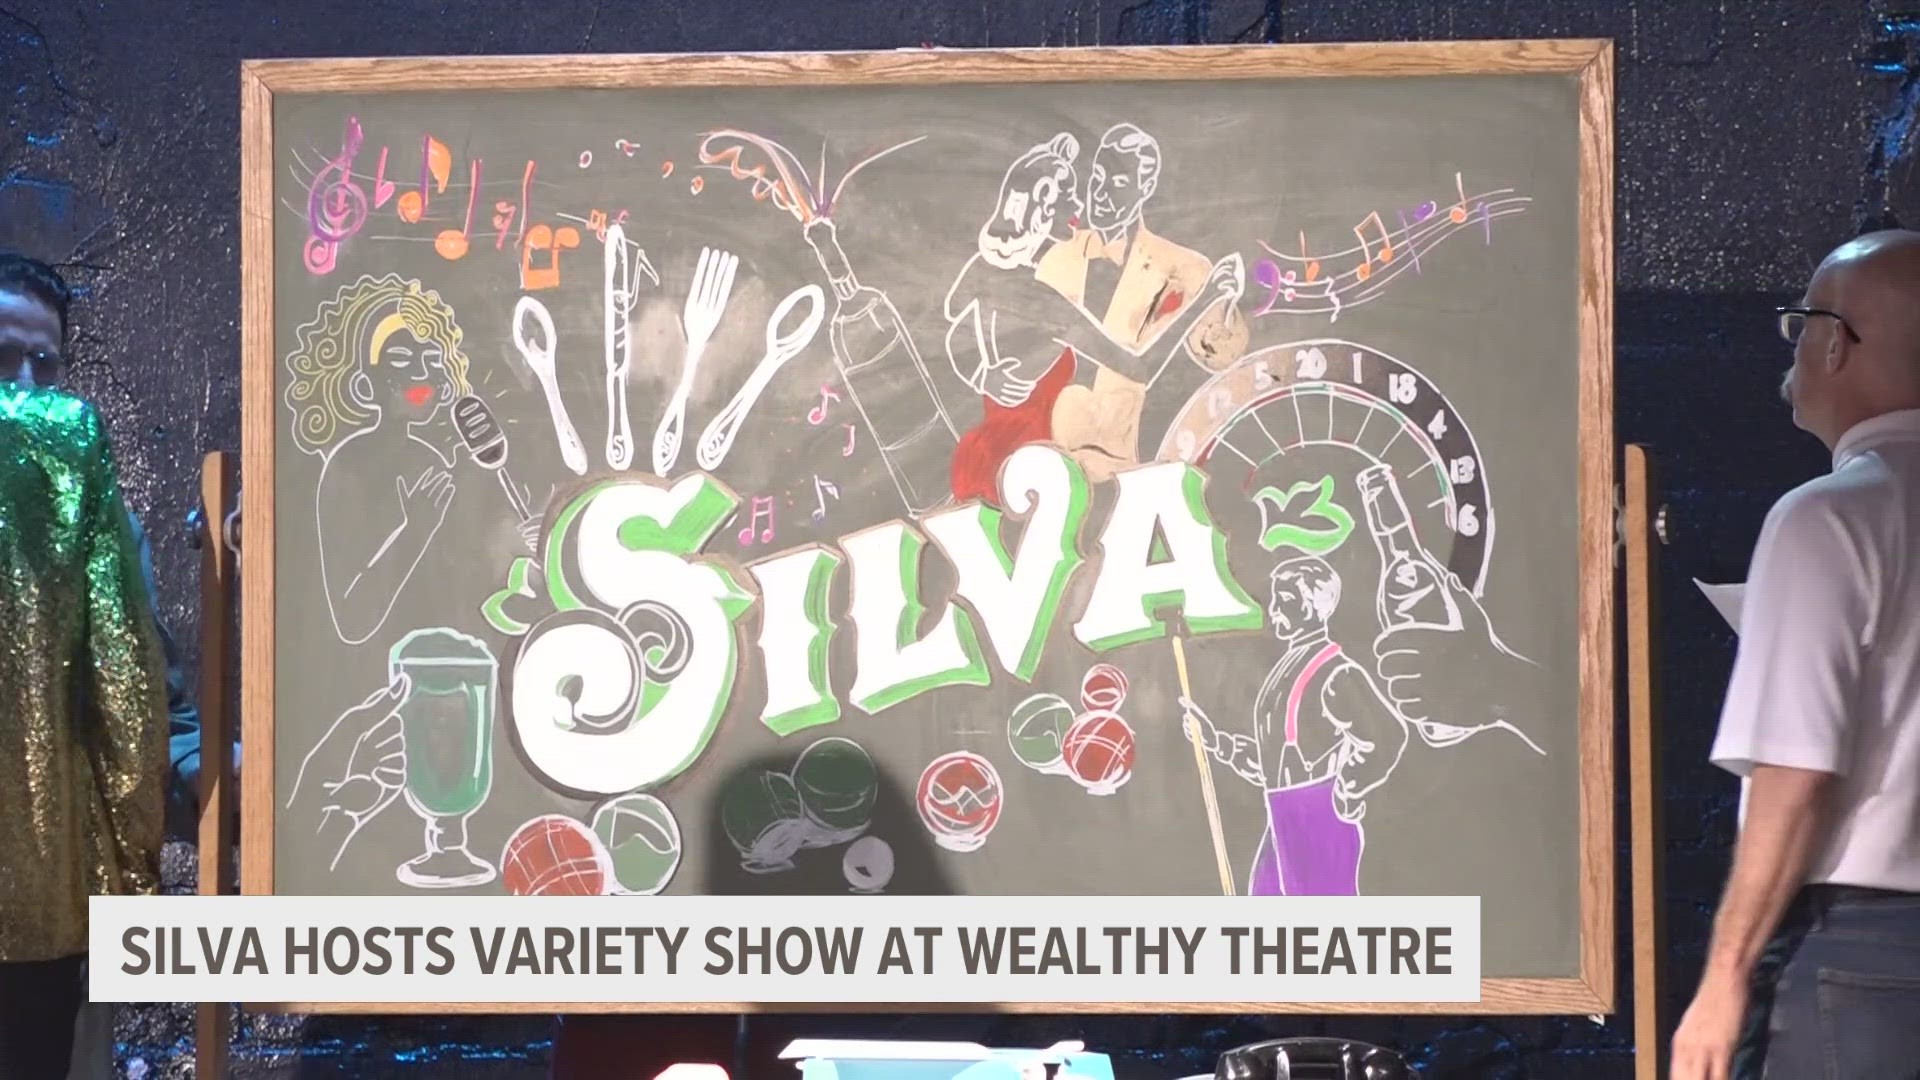 Wealthy Street Theatre saw a variety of acts and performers take the stage Thursday evening to show the community what to expect.